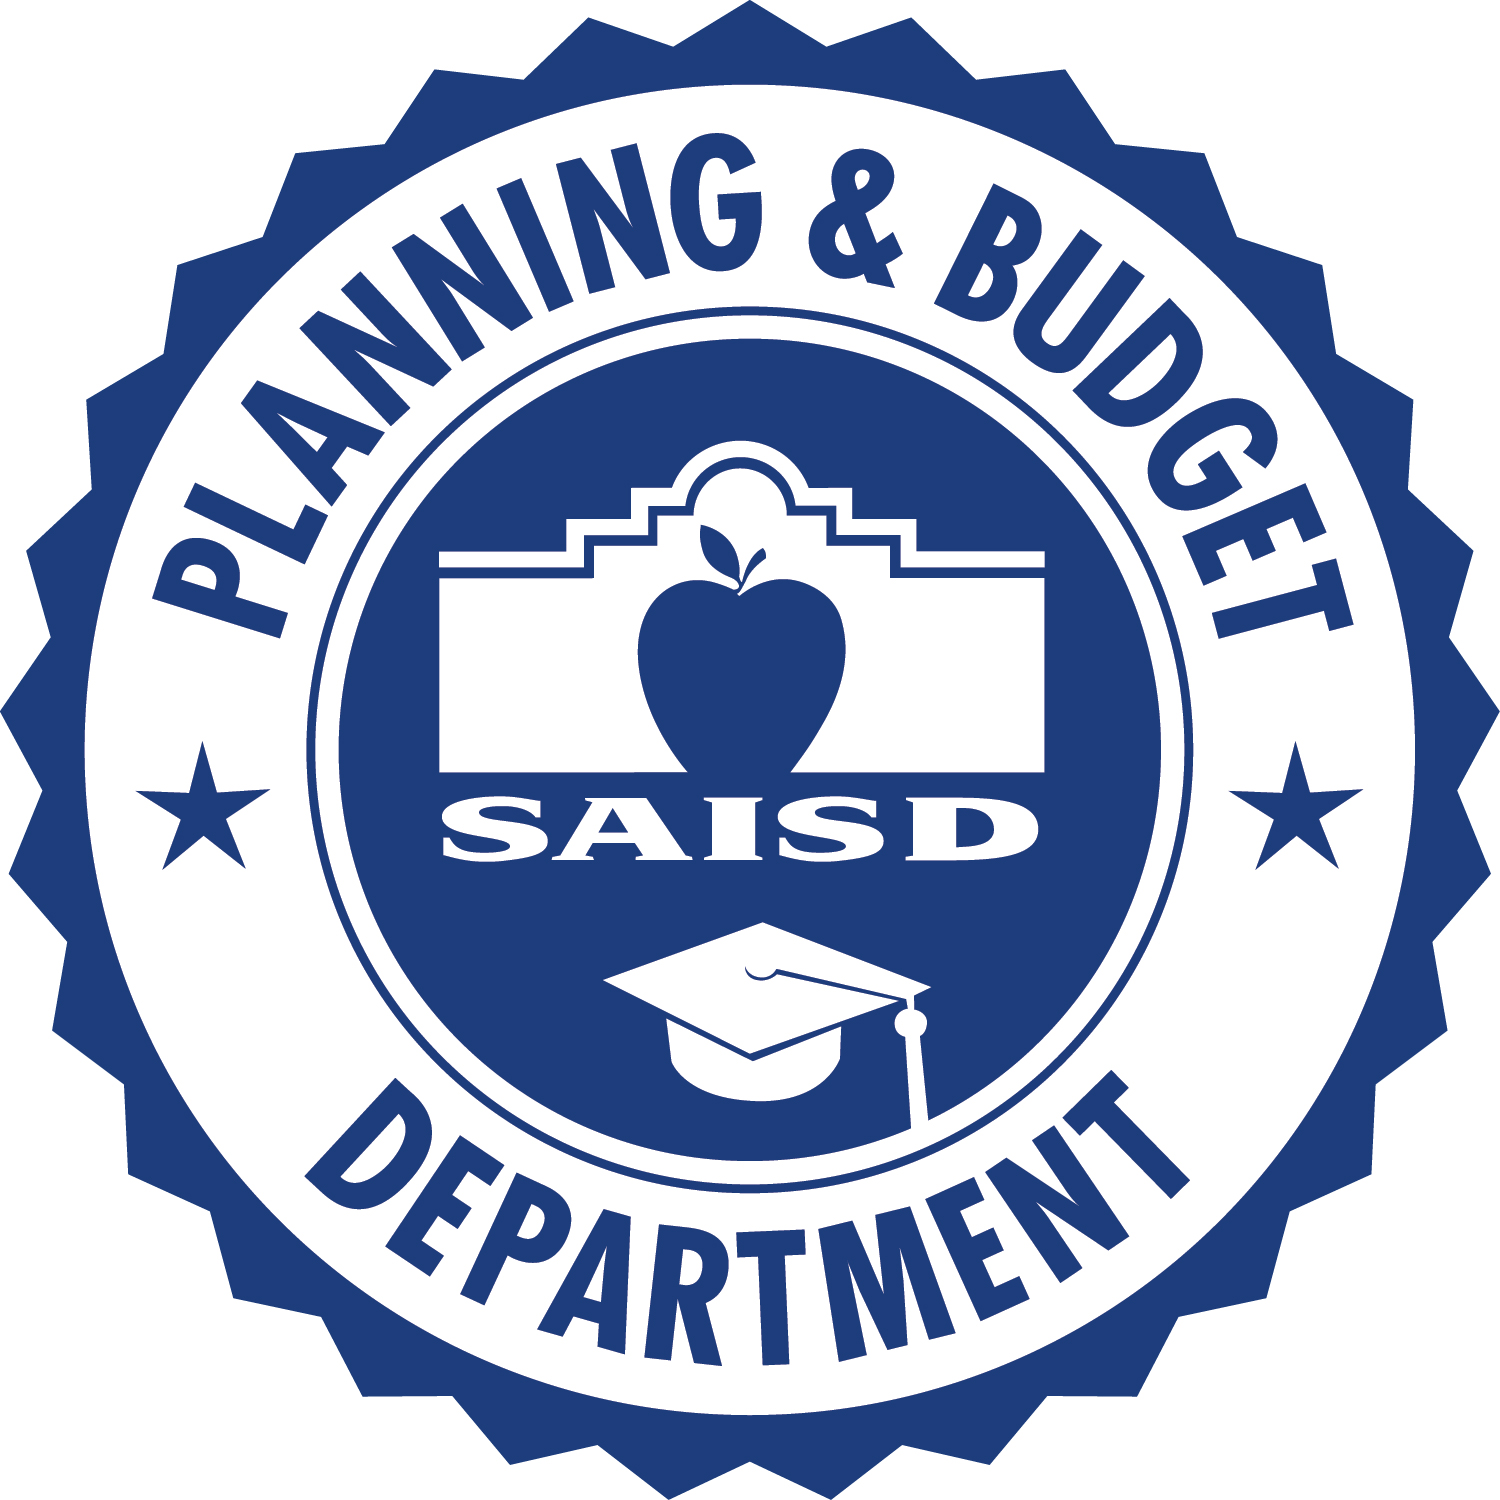 Planning and Budget logo